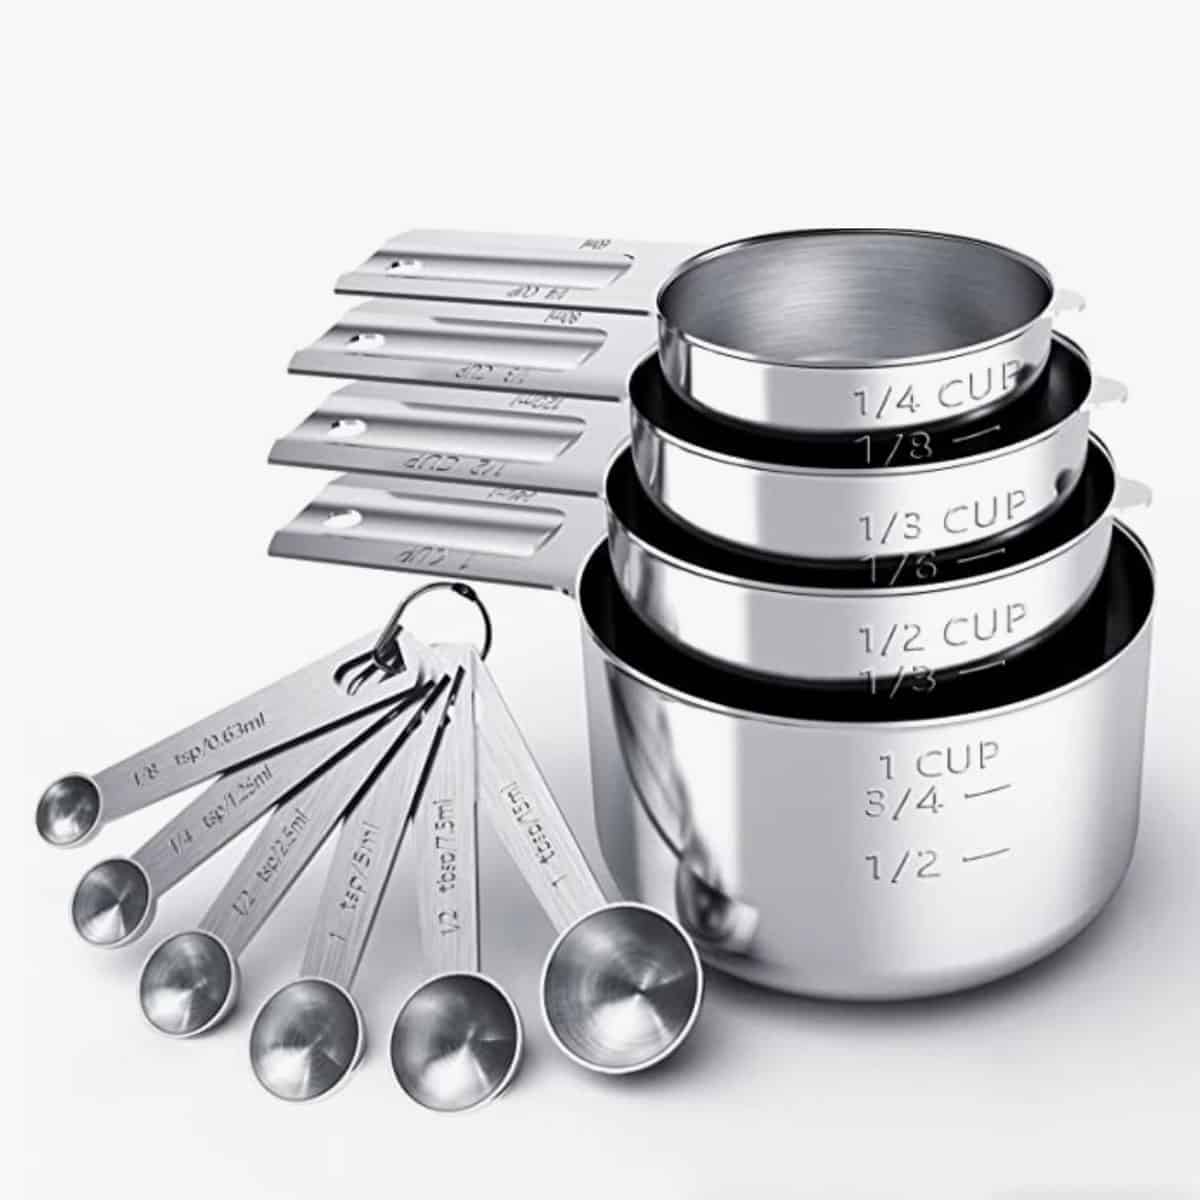 Stainless Steel Cup And Spoon measures